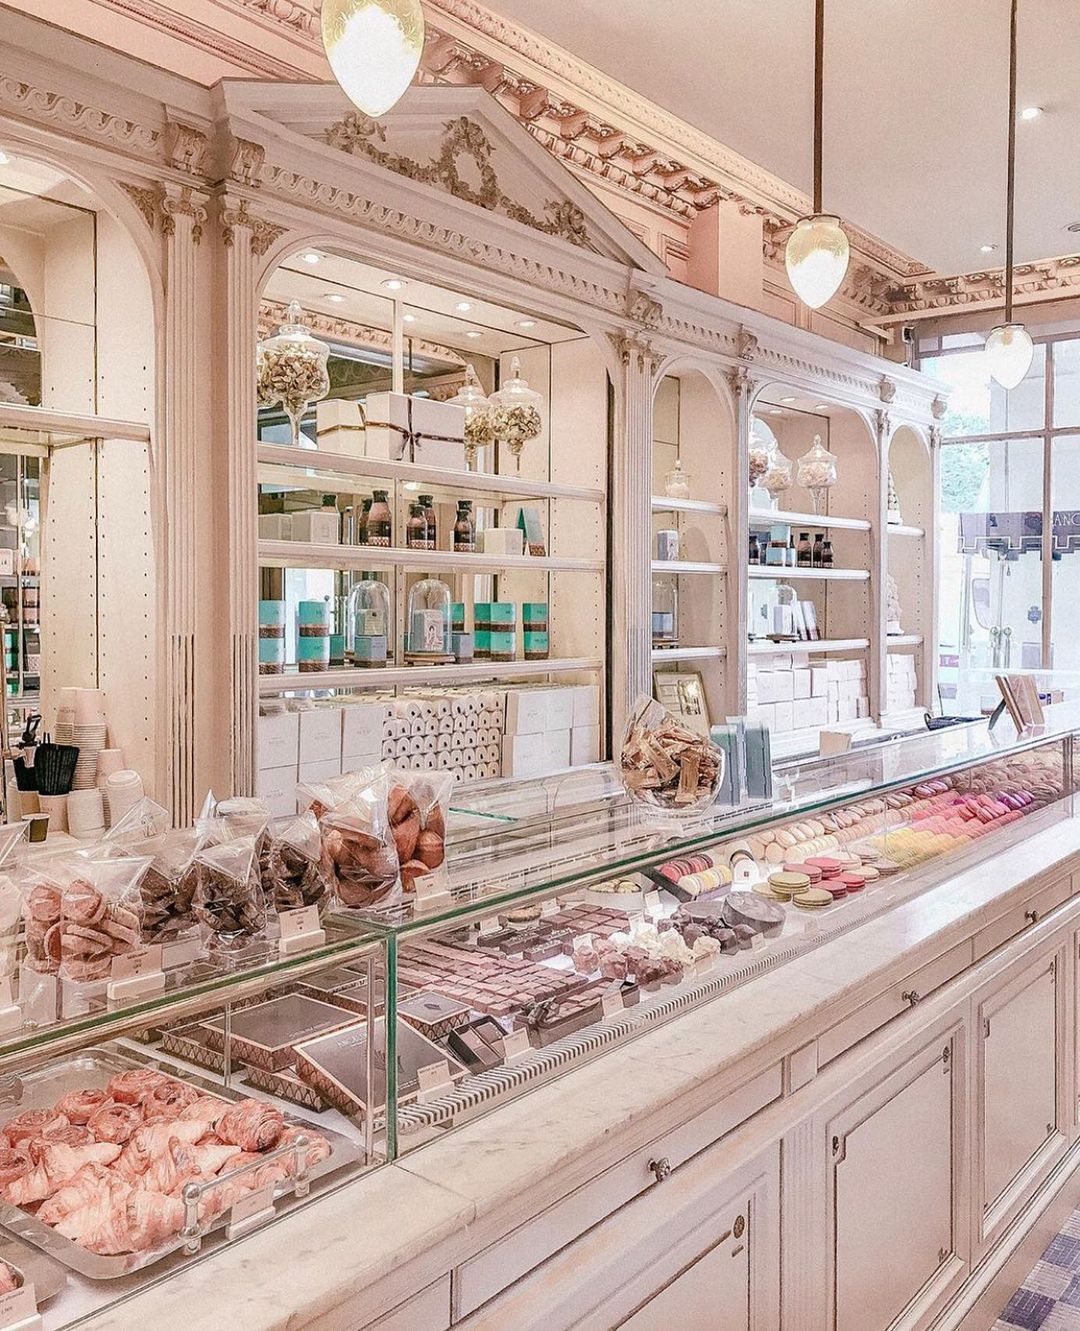 The Most Instagrammable Cafes in Paris